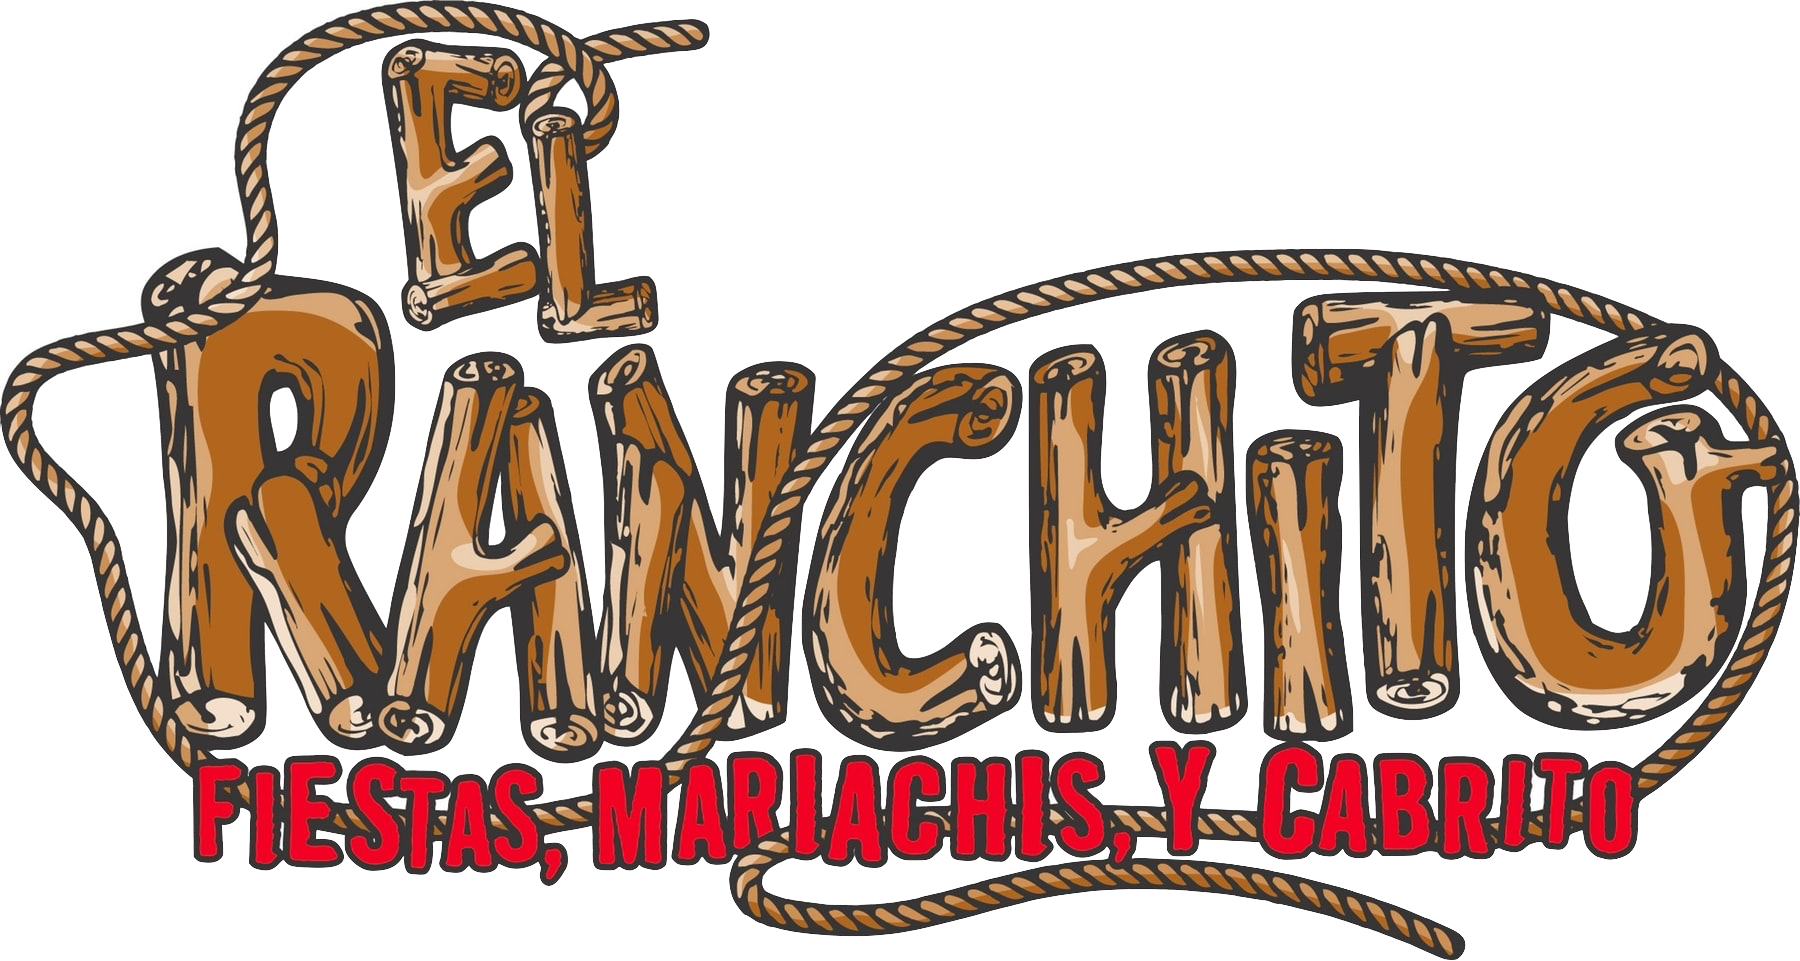 Download Hospitality Image - El Ranchito Logo PNG Image with No Backgroud -...